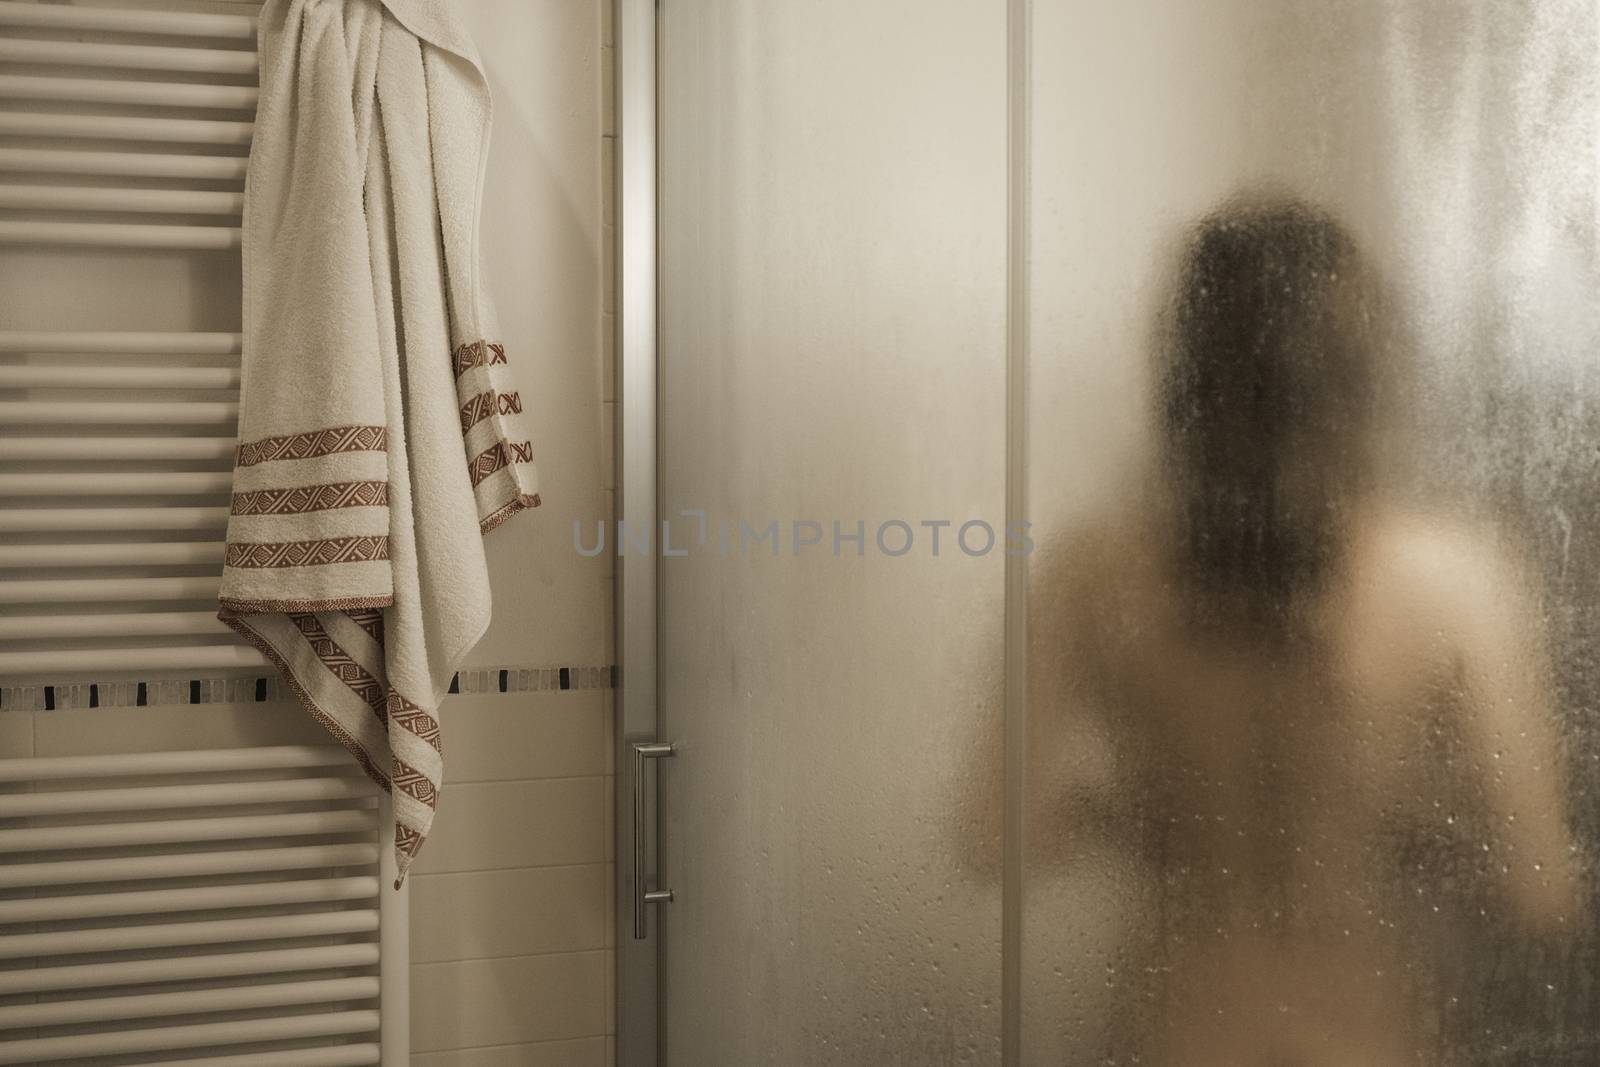 Sexy naked brunette woman take a shower inside the shower cabin seen through foggy glass in her modern design bathroom